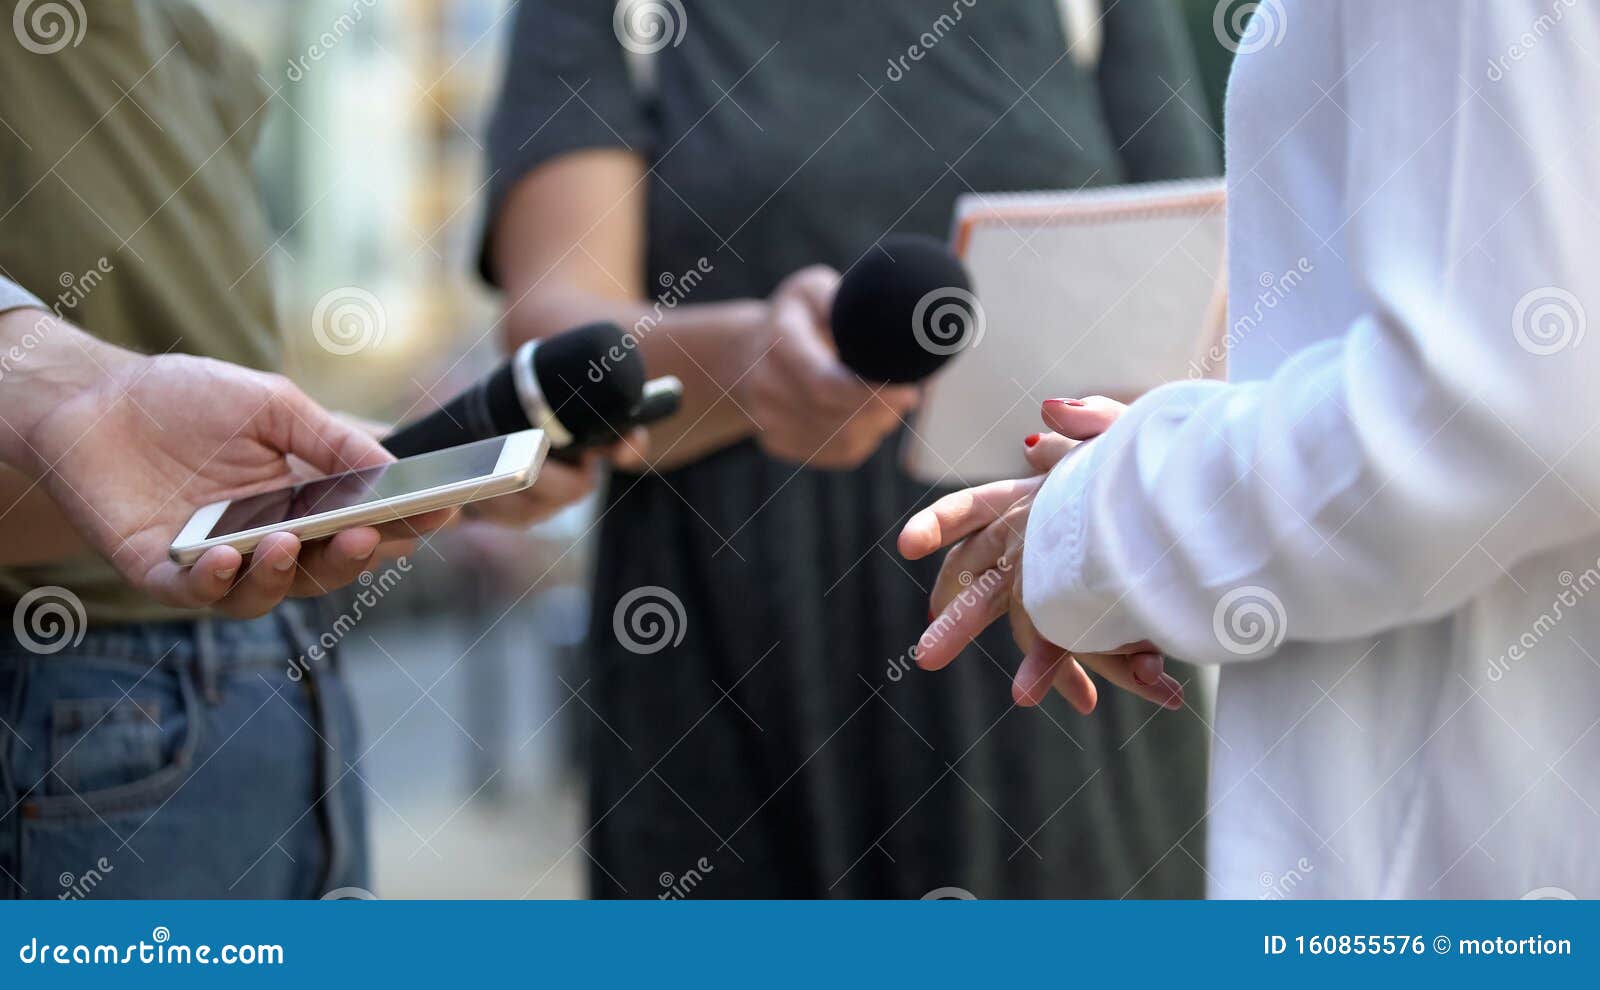 woman gesticulating during interview with media, press conference, close-up